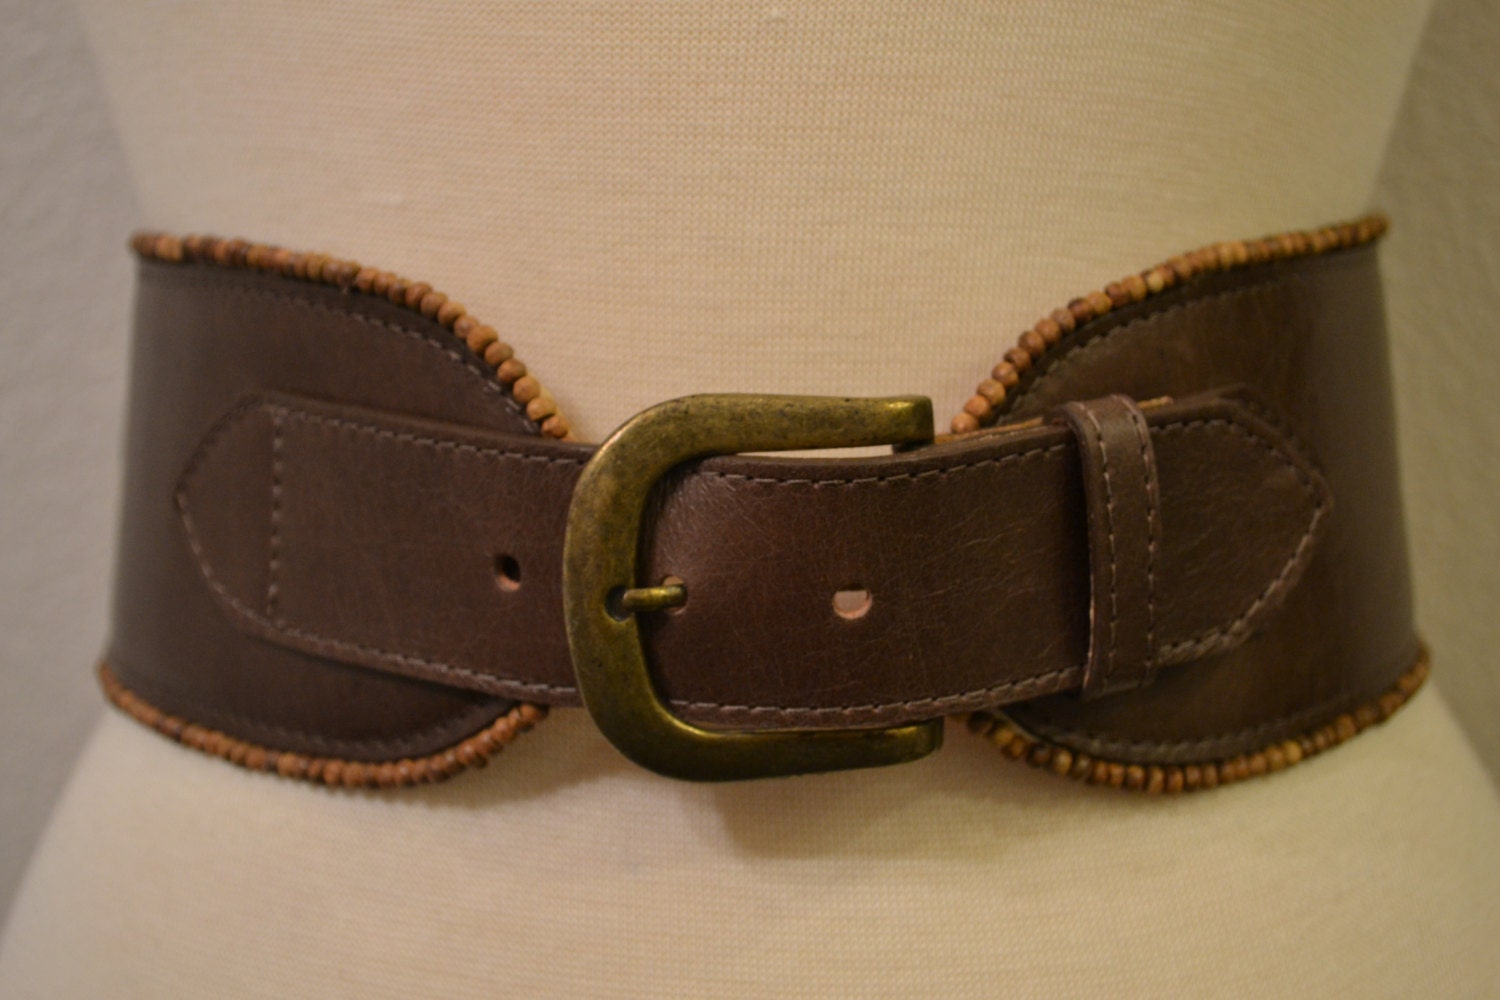 Women's Leather Waist Belt Brown distressed leather with